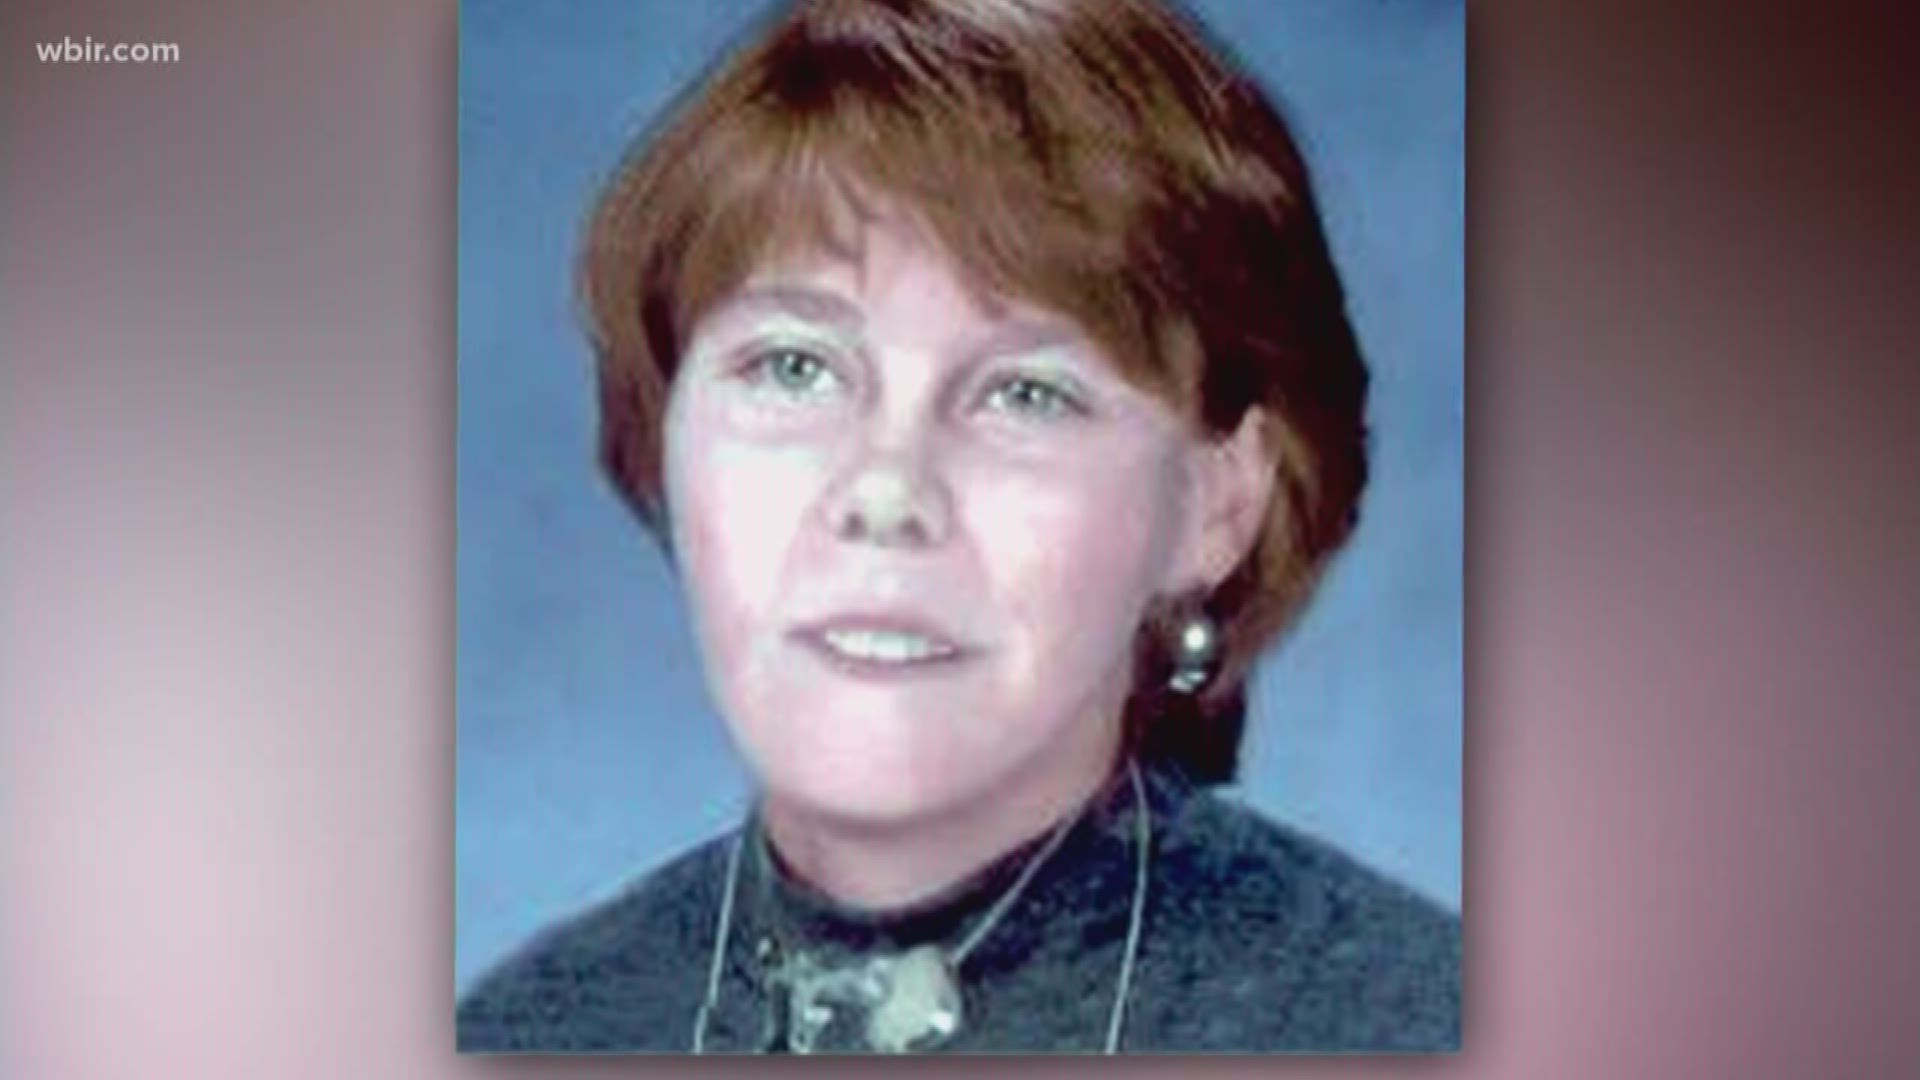 The Red-Headed Jane Doe in Knox County, Kentucky may now have a name and a family.